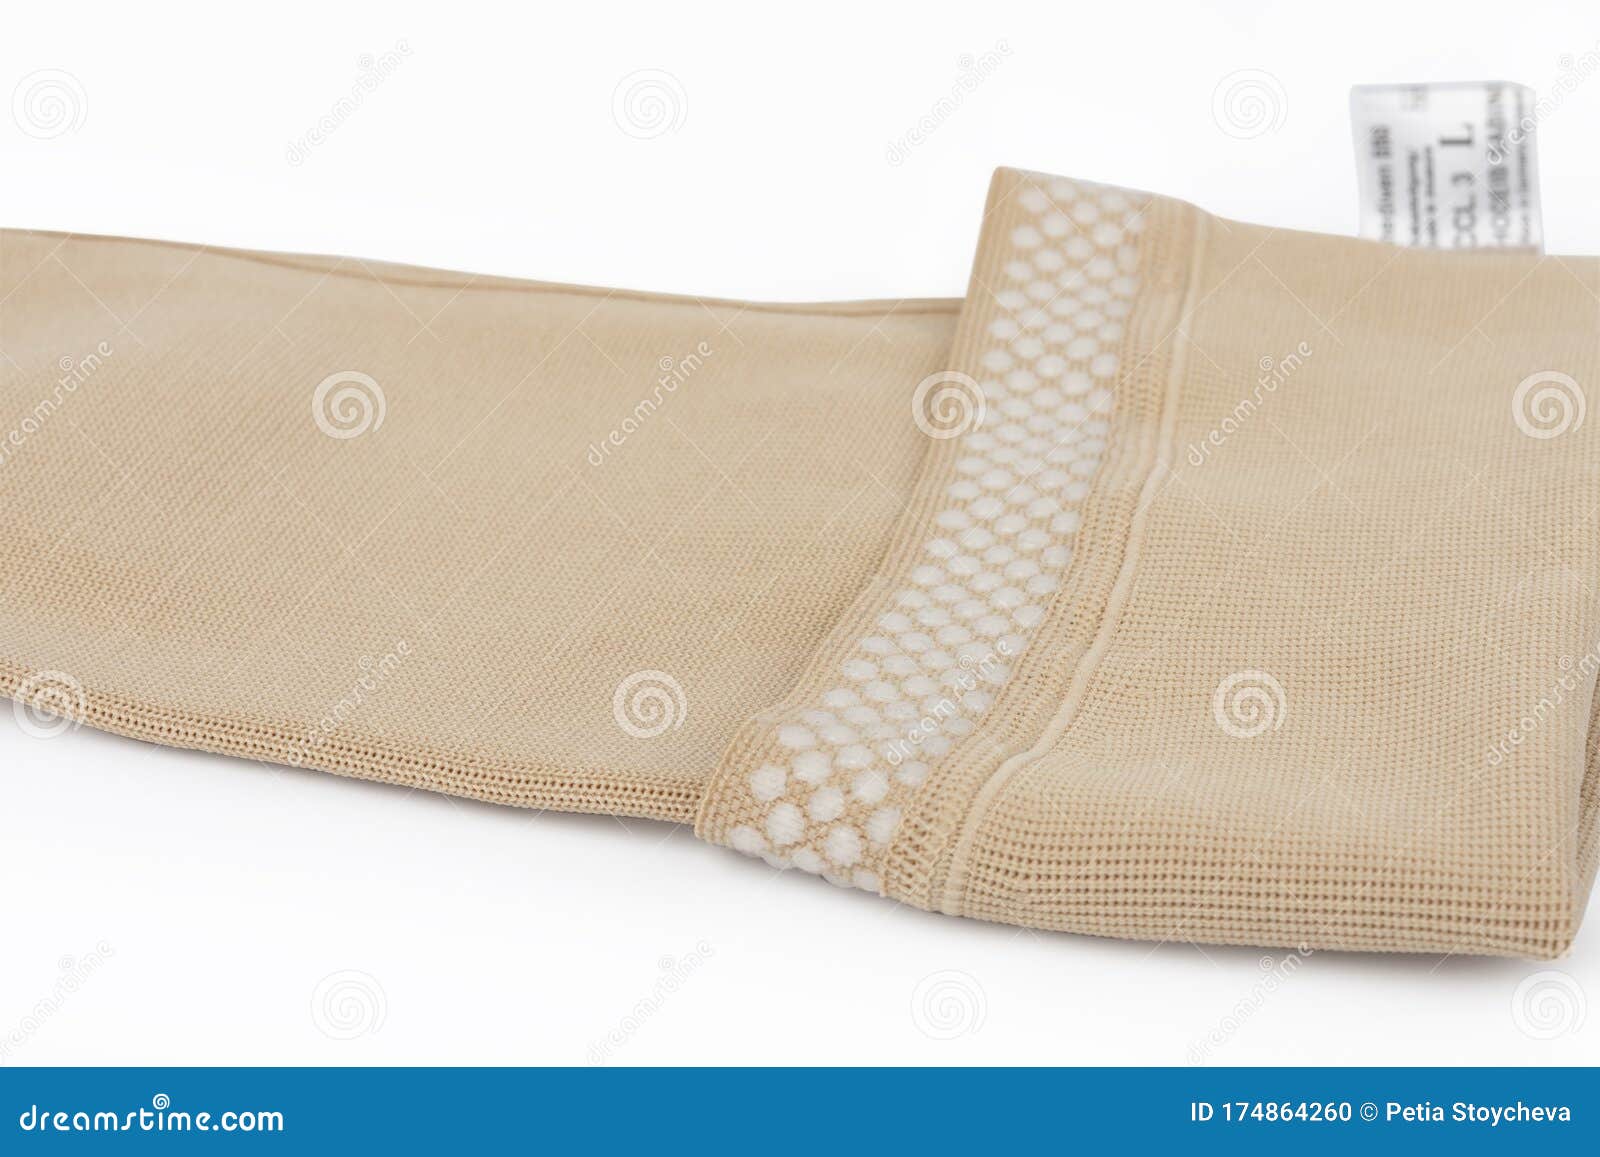 https://thumbs.dreamstime.com/z/close-up-flat-knit-graduated-compression-garments-leg-lymphedema-edema-lipedema-powerful-stocking-greater-containment-174864260.jpg